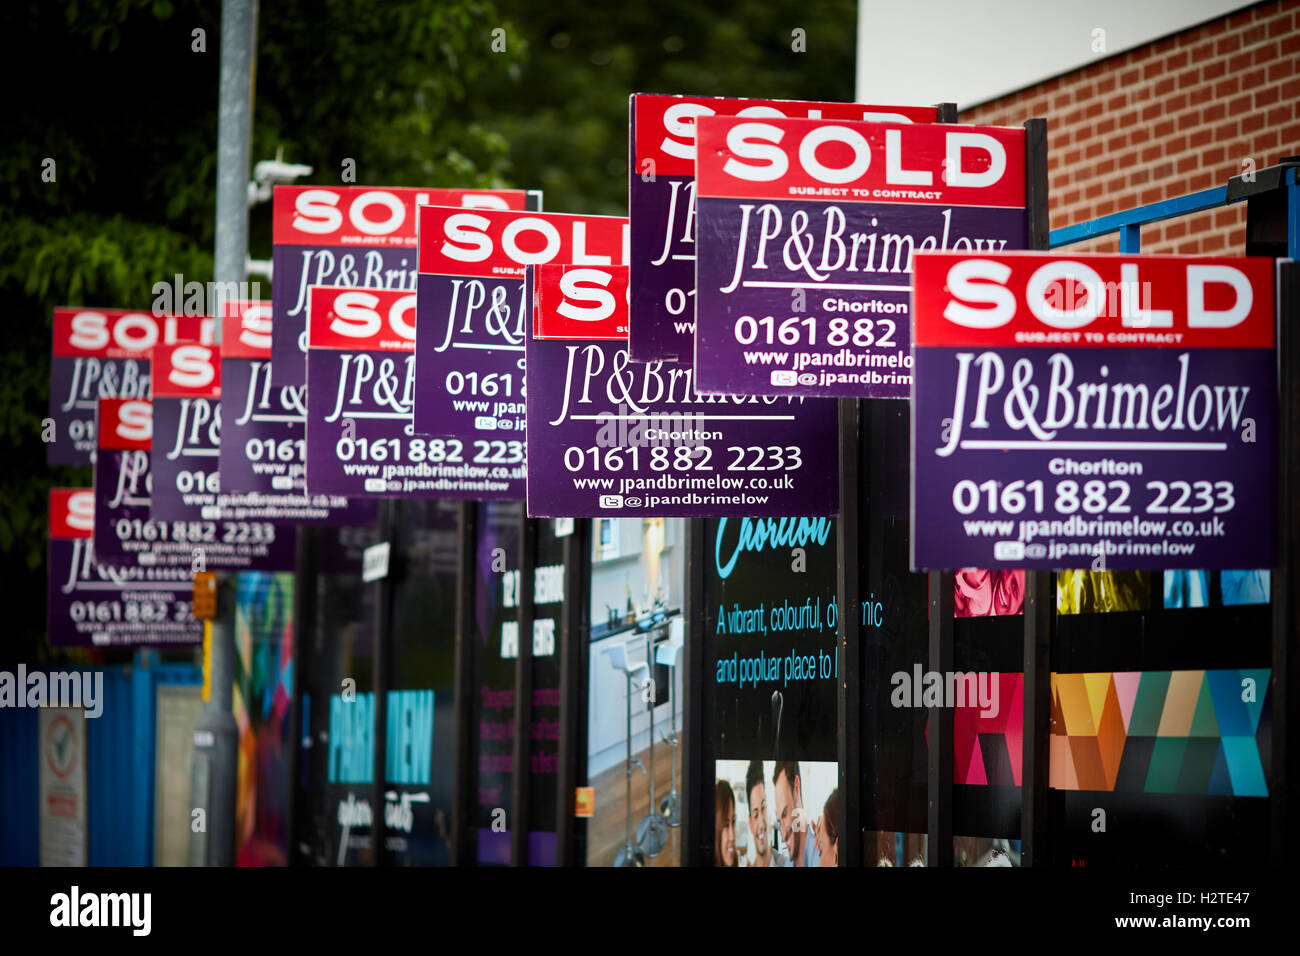 Estate agents sold signs boards sale marketing street advertisement ...